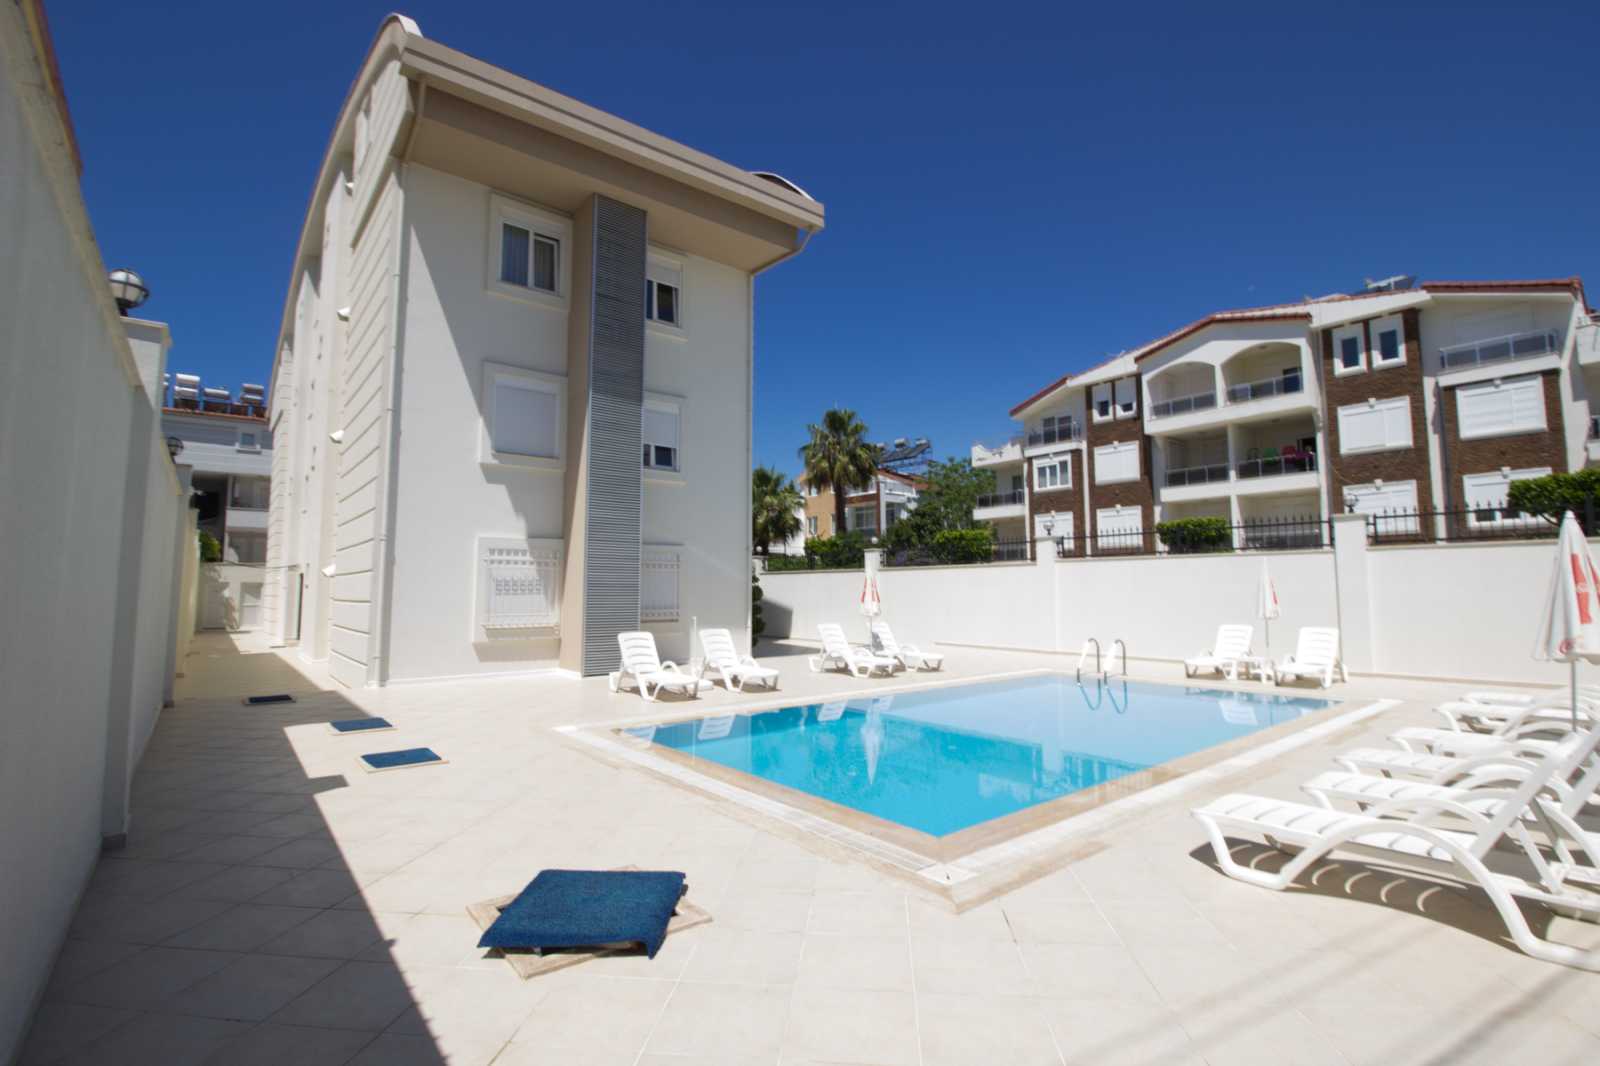 Side Investment Apartments - Pool area